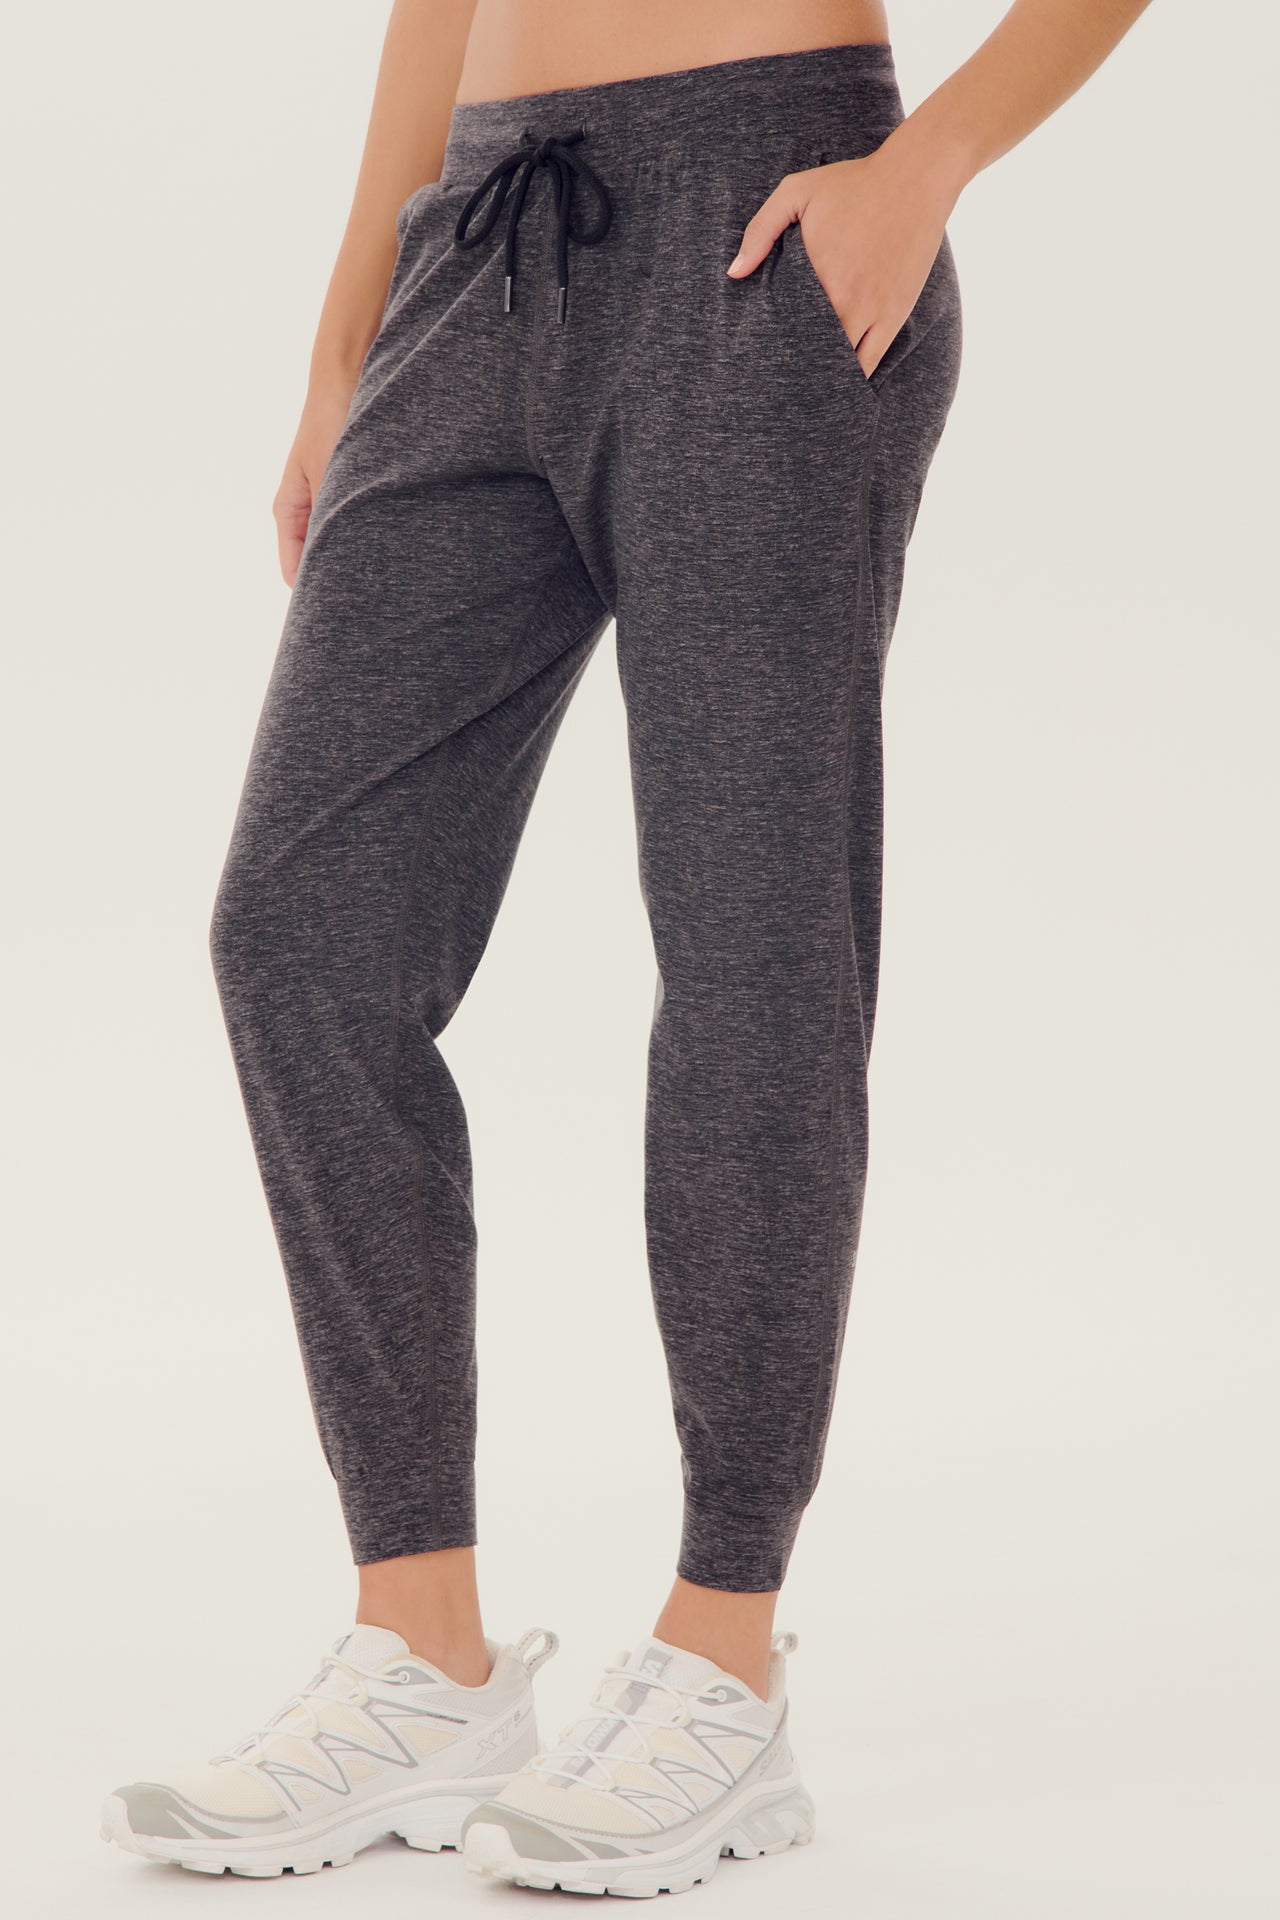 Side view of girl wearing dark grey sweatpants with black tie around waistband with white shoes